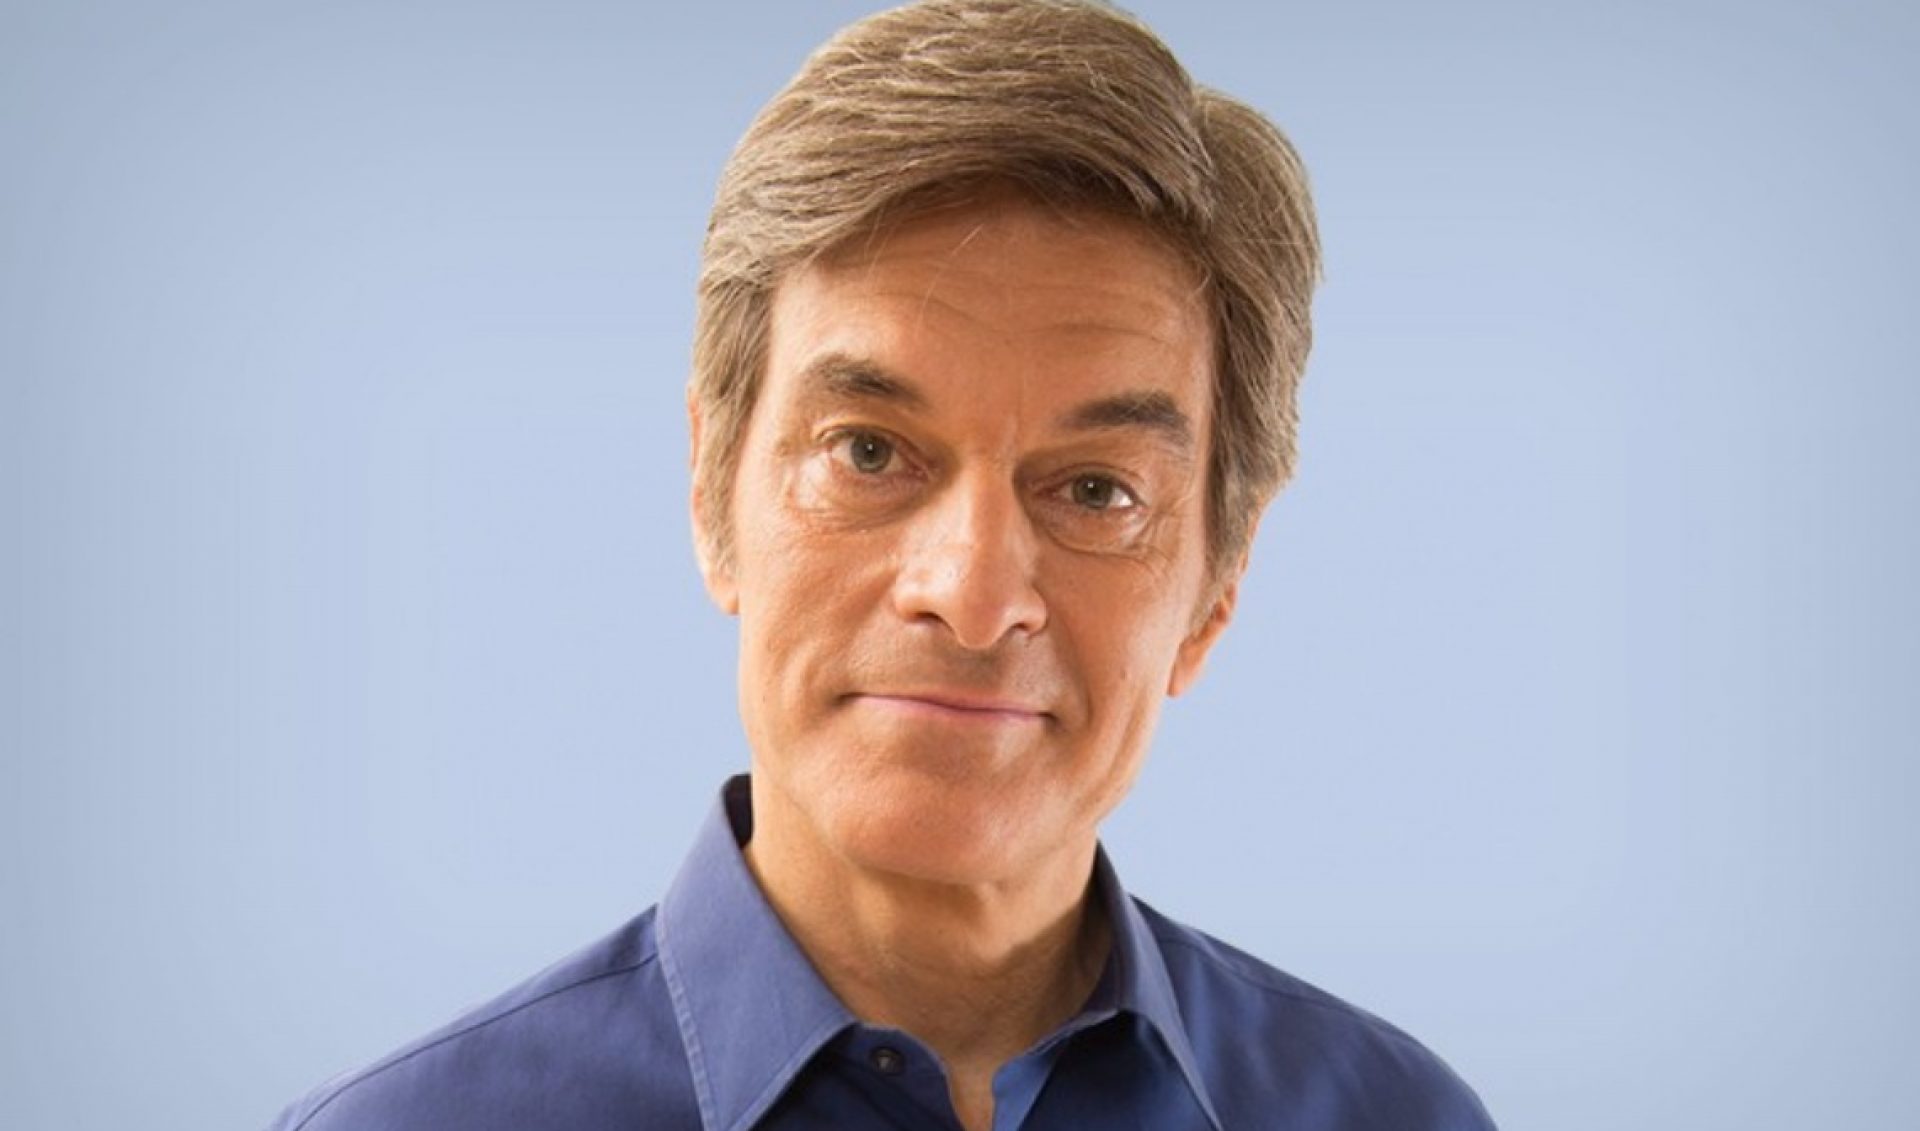 Media Company Founded By Dr. Oz To Stream Martial Arts On Twitch